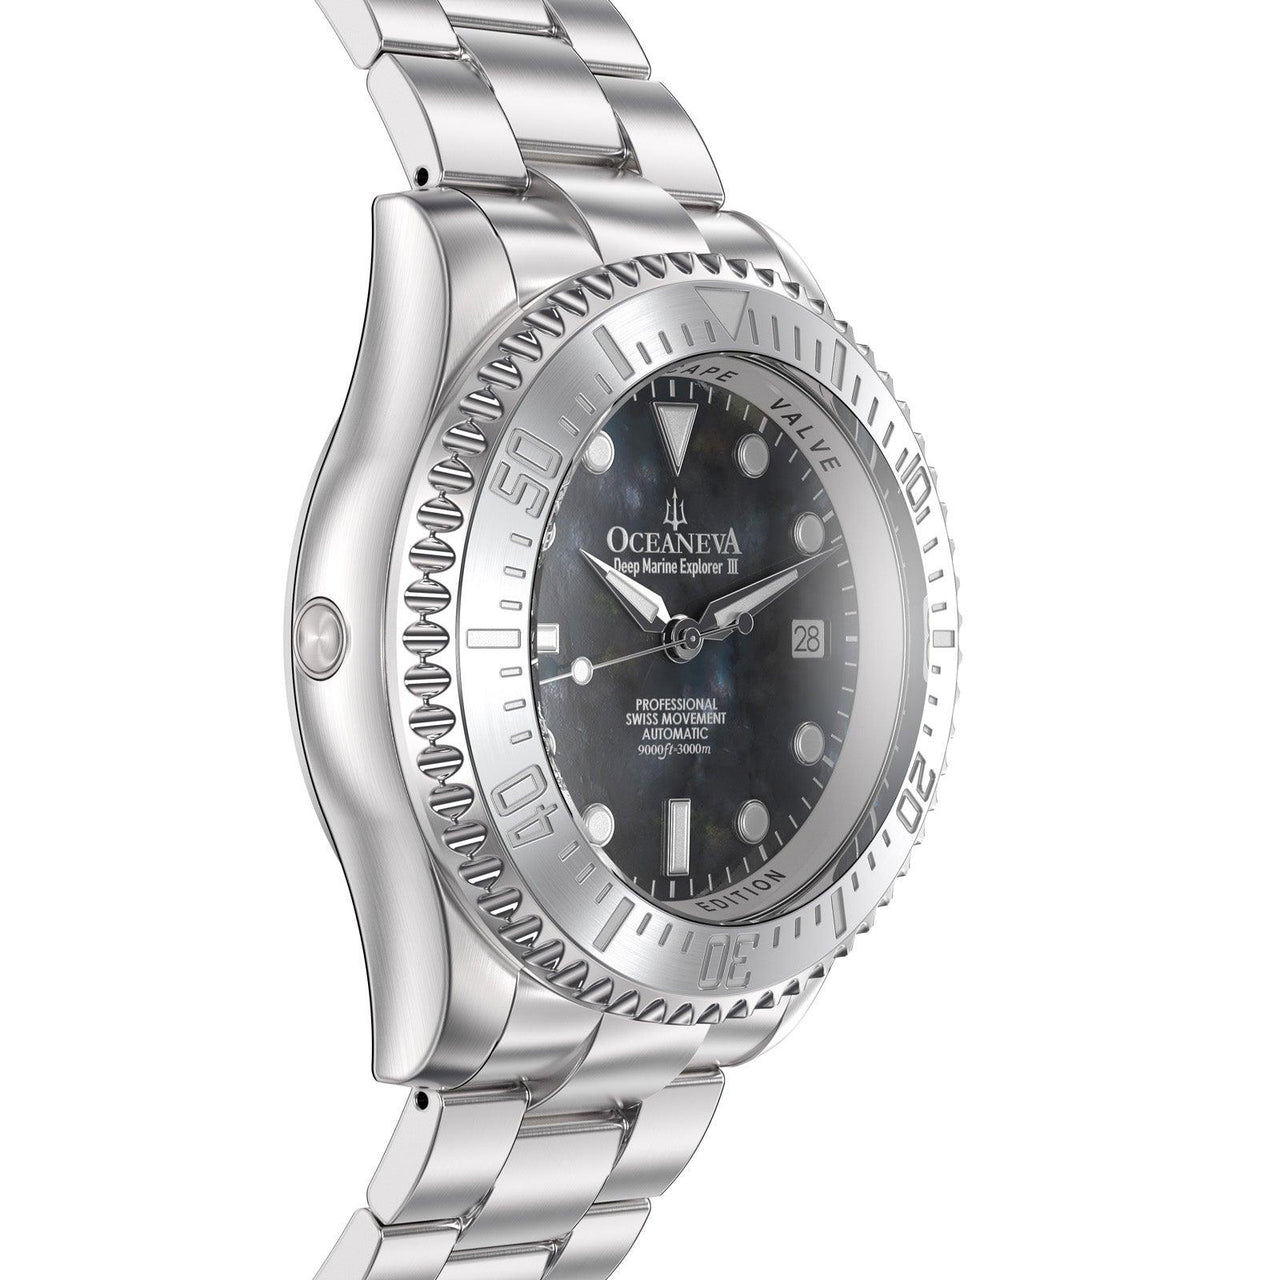 Oceaneva 3000M Dive Watch Gun Metal Gray Mother of Pearl Stainless Side Helium Escape Valve View